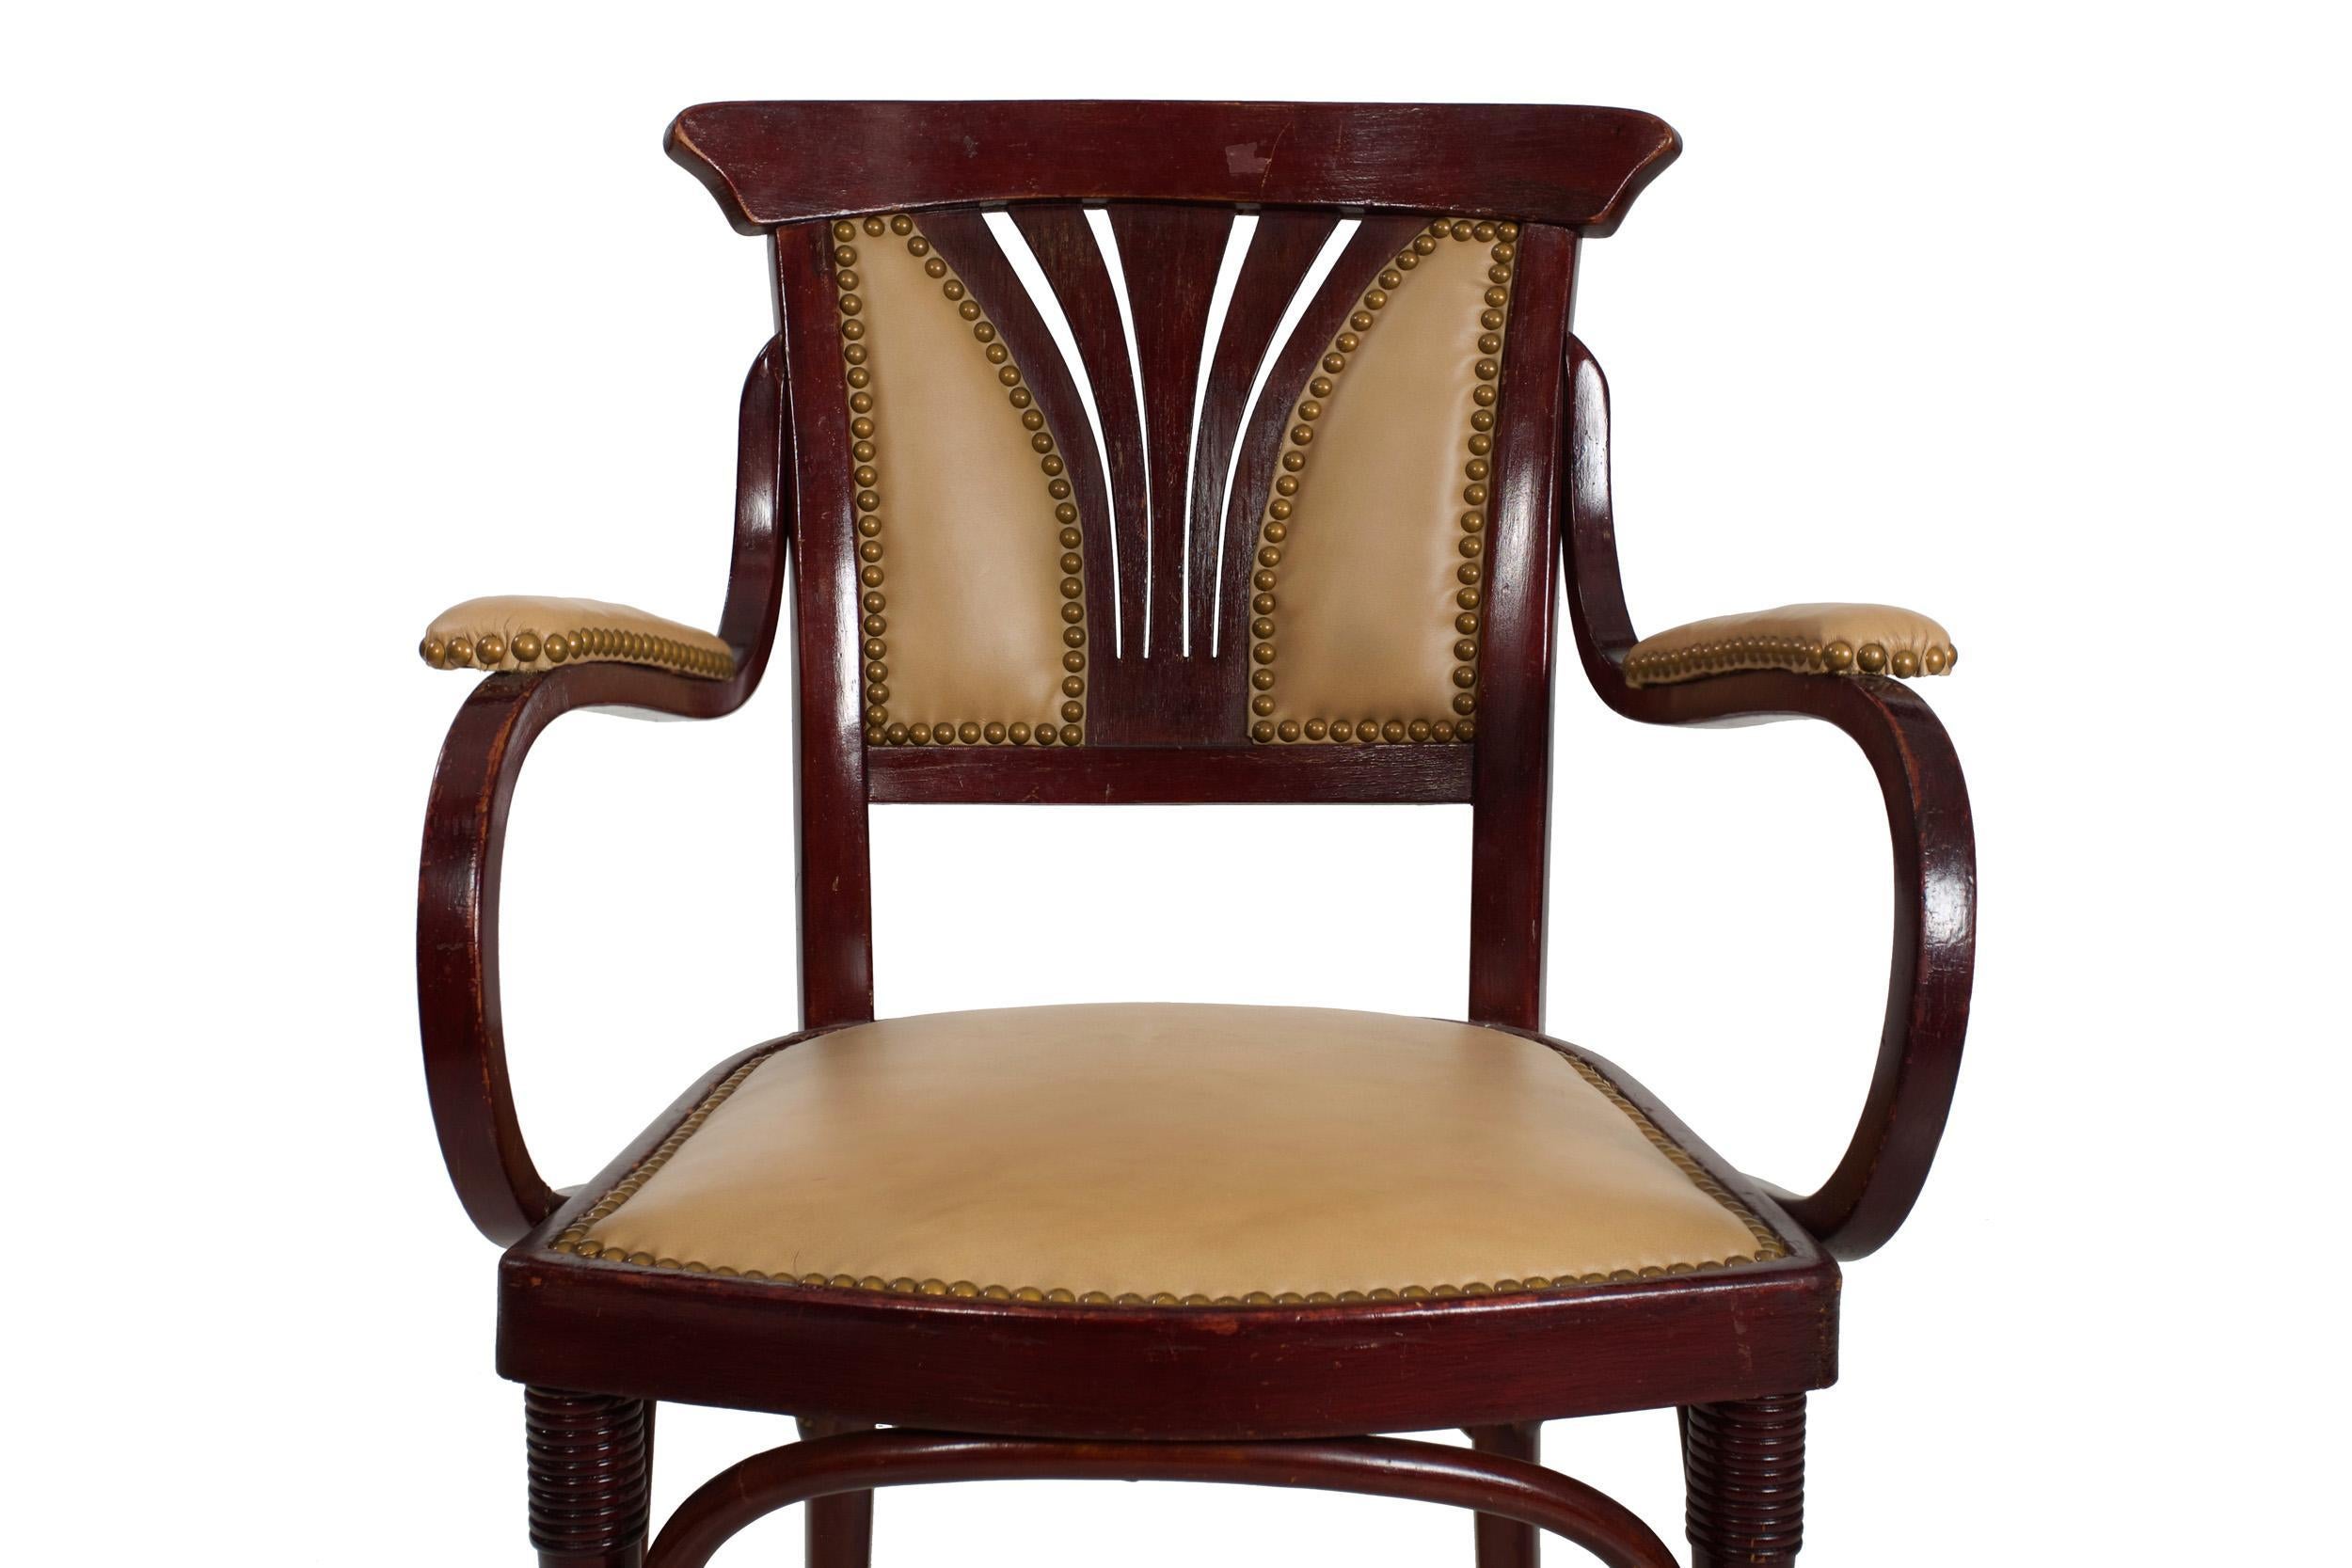 20th Century Vienna Secessionist Bentwood Arm Chair by Jacob & Josef Kohn For Sale